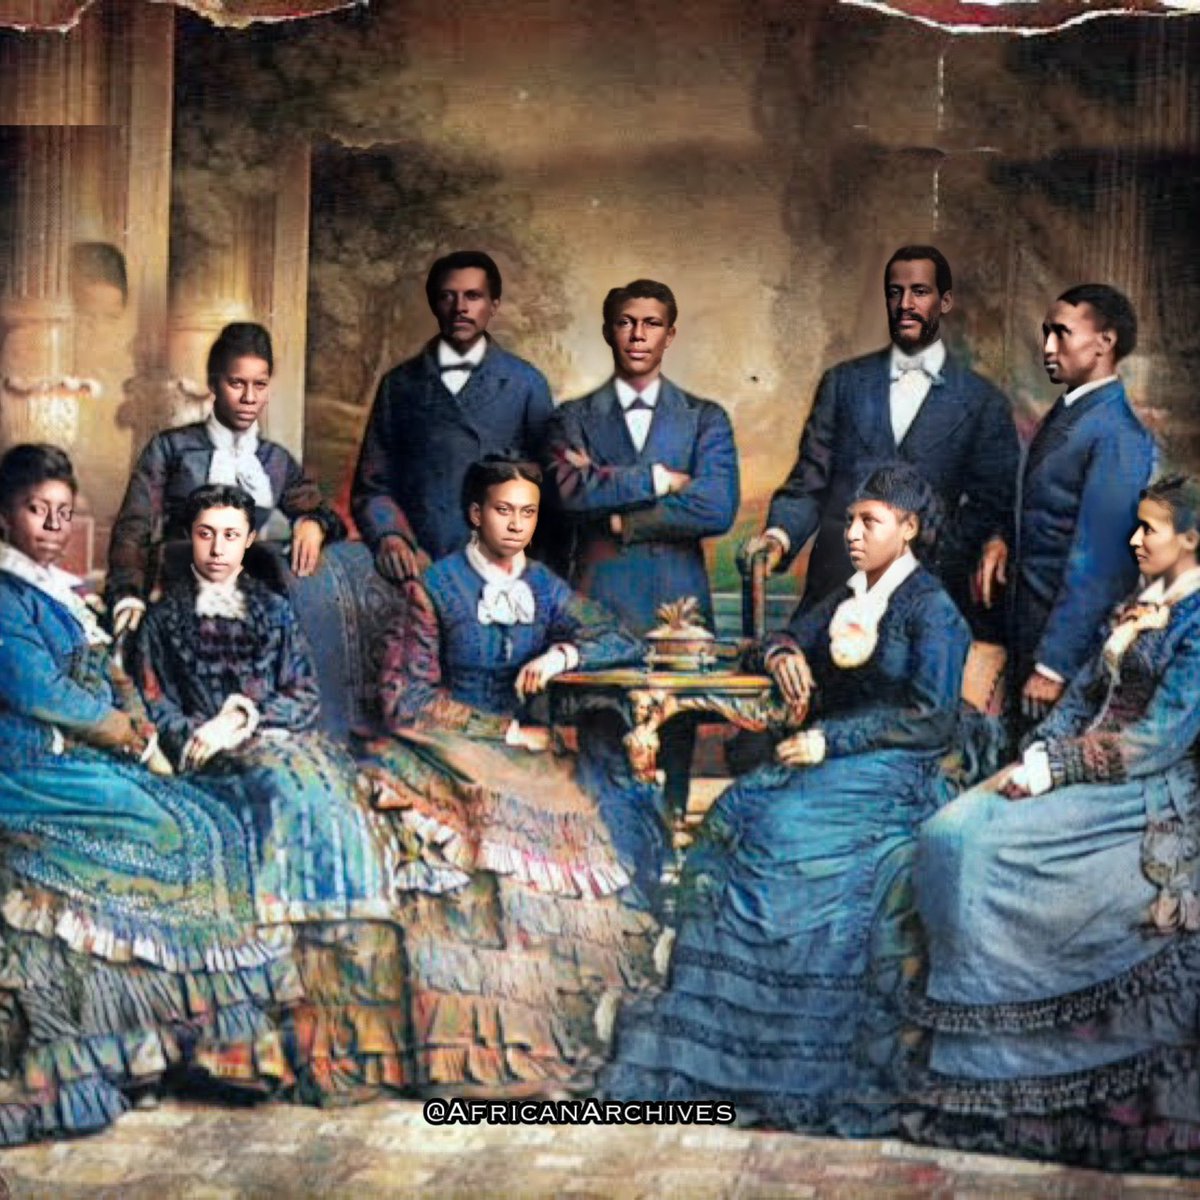 Nashville was given the Nickname ‘Music City’ by England's Queen Victoria after receiving the Fisk University Jubilee Singers in her court in 1873. The group, made of mostly those formely enslaved, put Nashville on the musical map. —Fisk University opened in Nashville in 1866